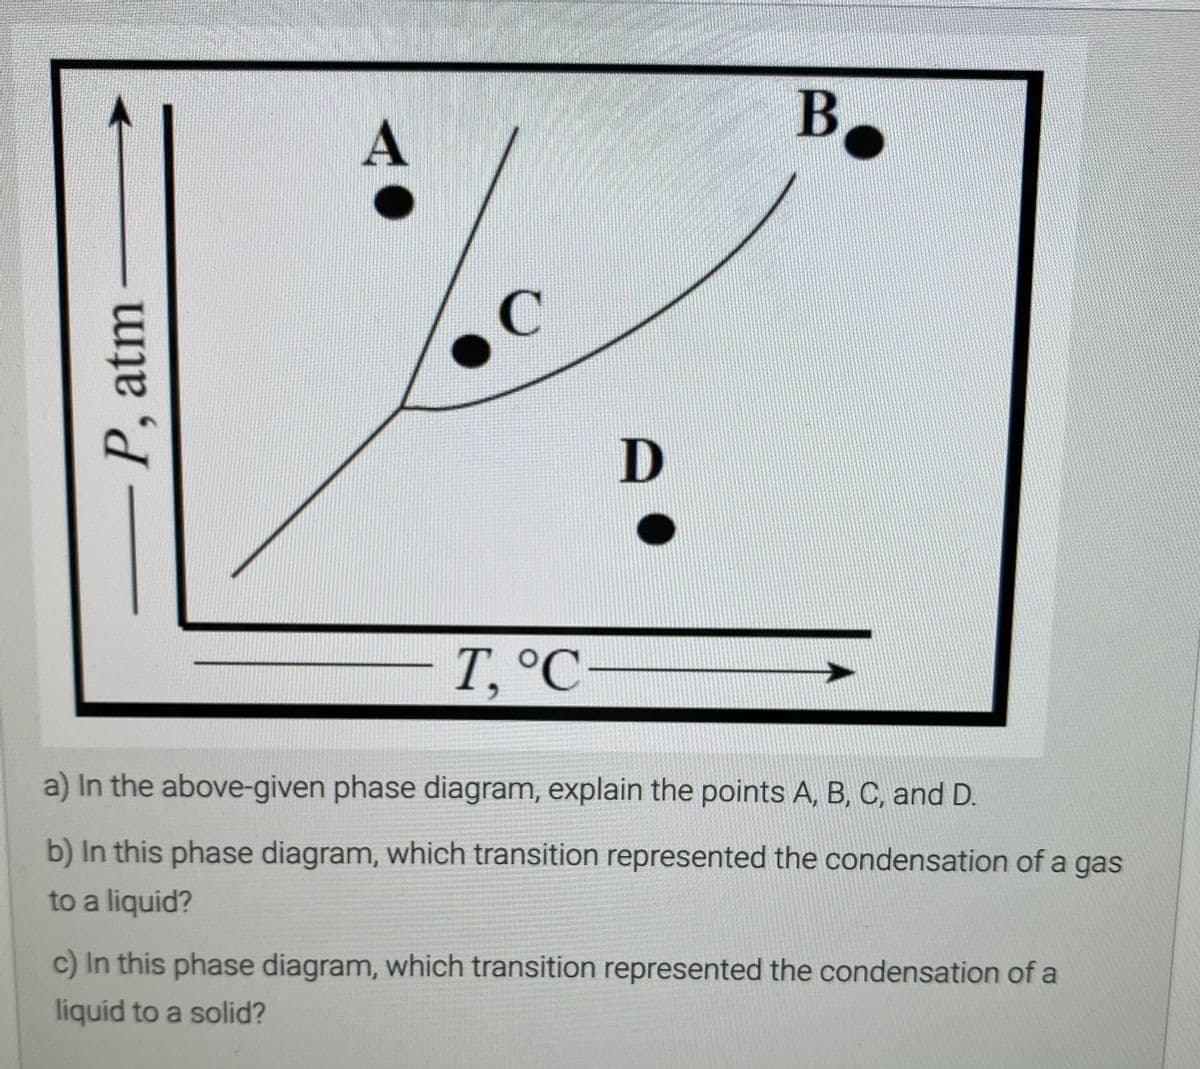 B,
A
D
T, °C
a) In the above-given phase diagram, explain the points A, B, C, and D.
b) In this phase diagram, which transition represented the condensation of a gas
to a liquid?
c) In this phase diagram, which transition represented the condensation of a
liquid to a solid?
-P, atm
